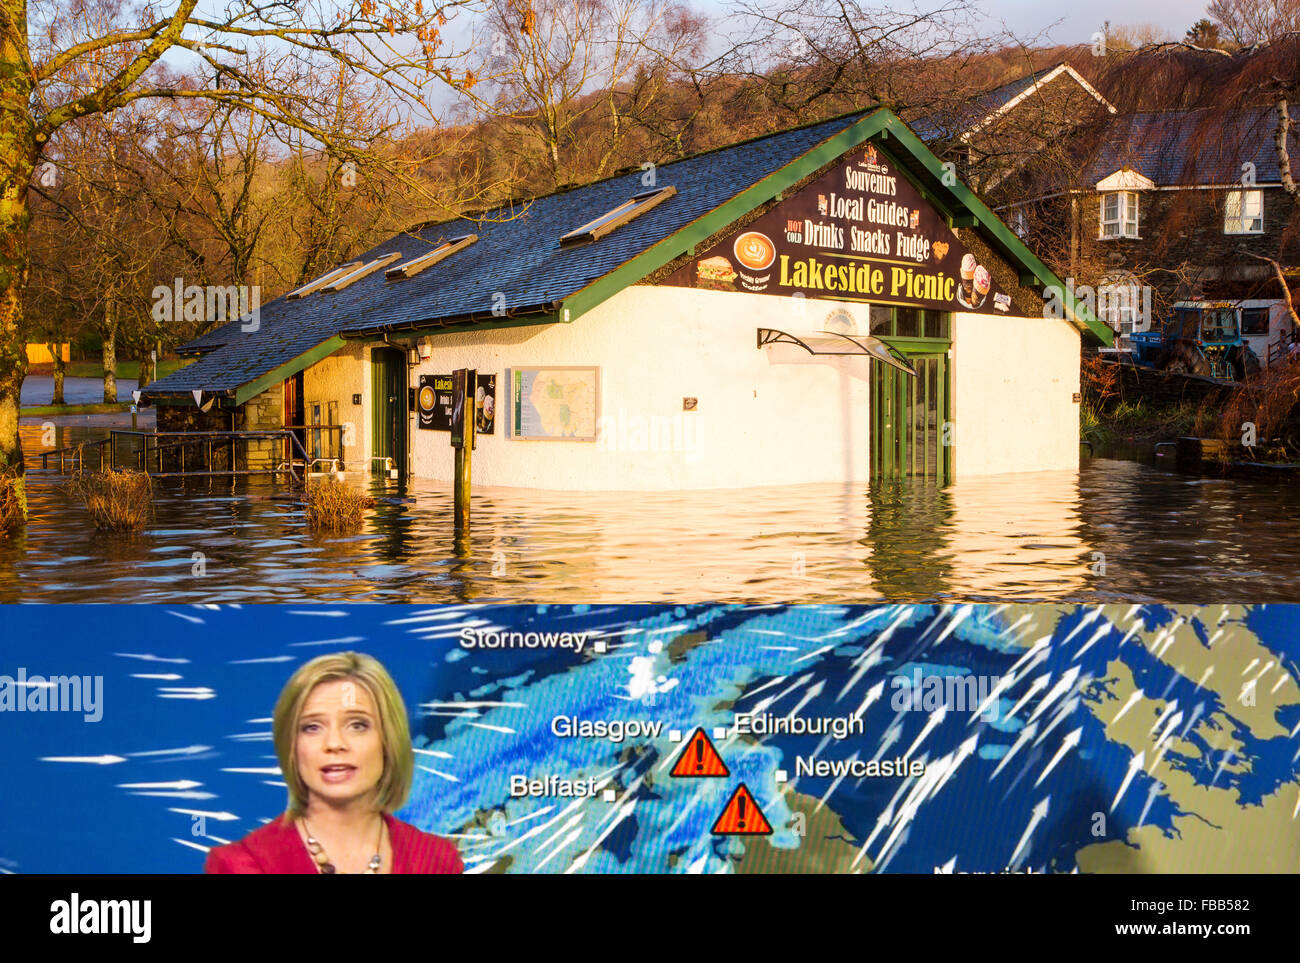 A composite image of the Storm Desmond weather forecast and its impacts, here the Lakeside Picnic surrounded by flood water after Lake Windermere burst its banks in Ambleside in the Lake District on Monday 7th December 2015, after torrential rain from storm Desmond. Stock Photo